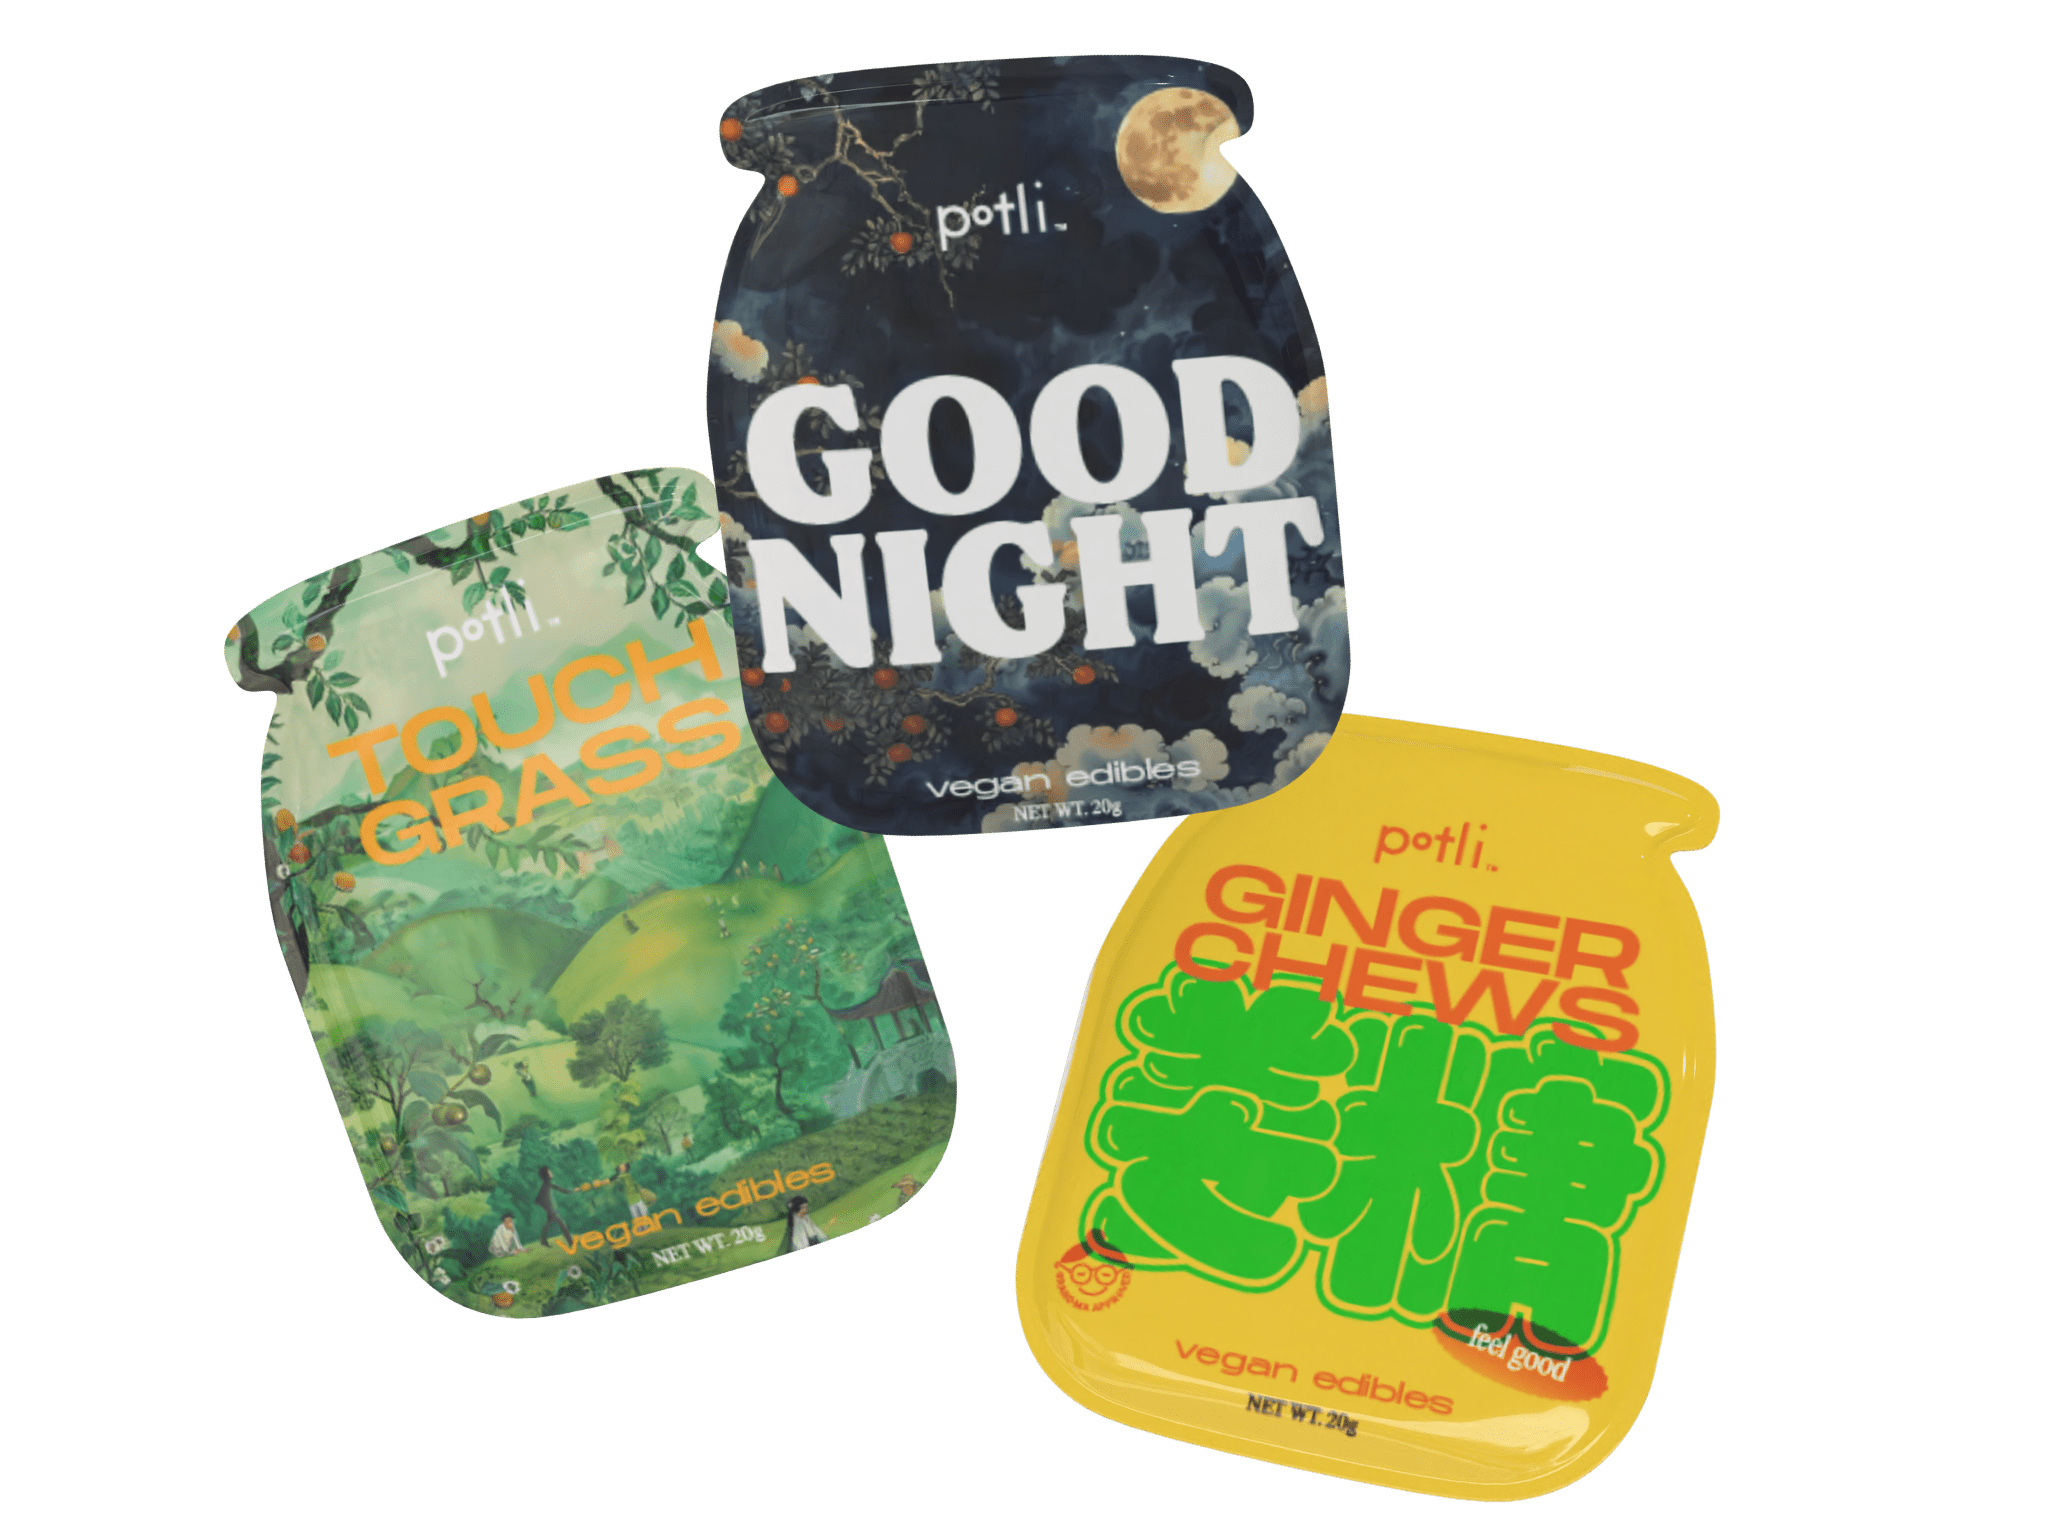 Three colorful pouches of vegan edibles labeled 'TOUCH GRASS,' 'GOOD NIGHT,' and 'GINGER CHEWS.'